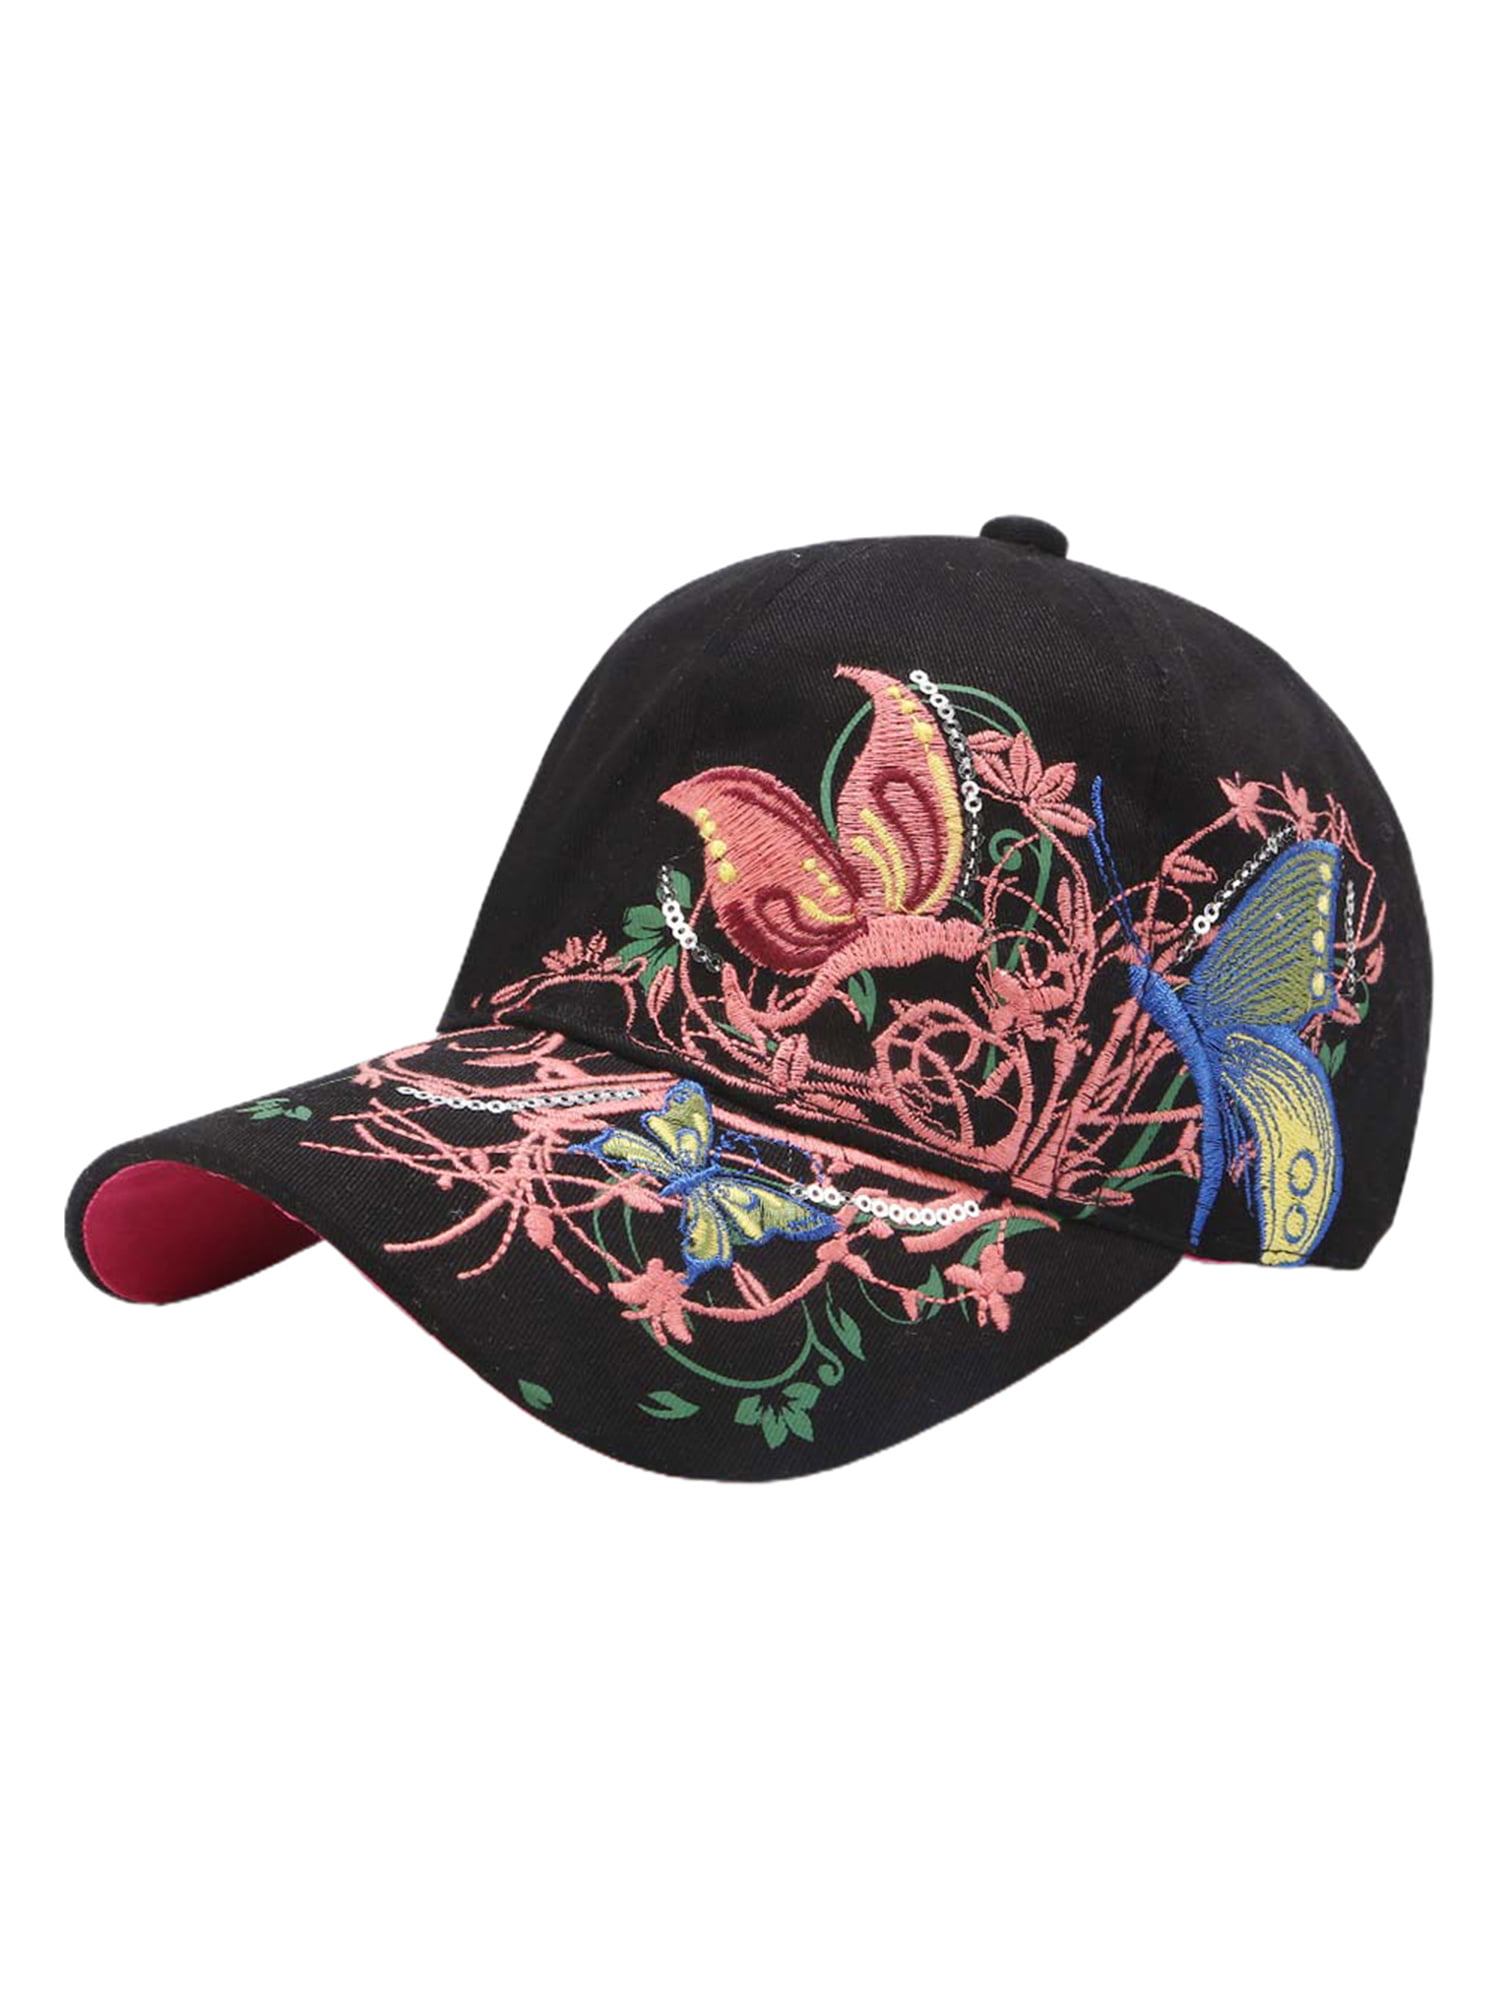 Colorful Butterflies and Flowers Classic Snapback Hat Flat Ball Cap Adjustable 